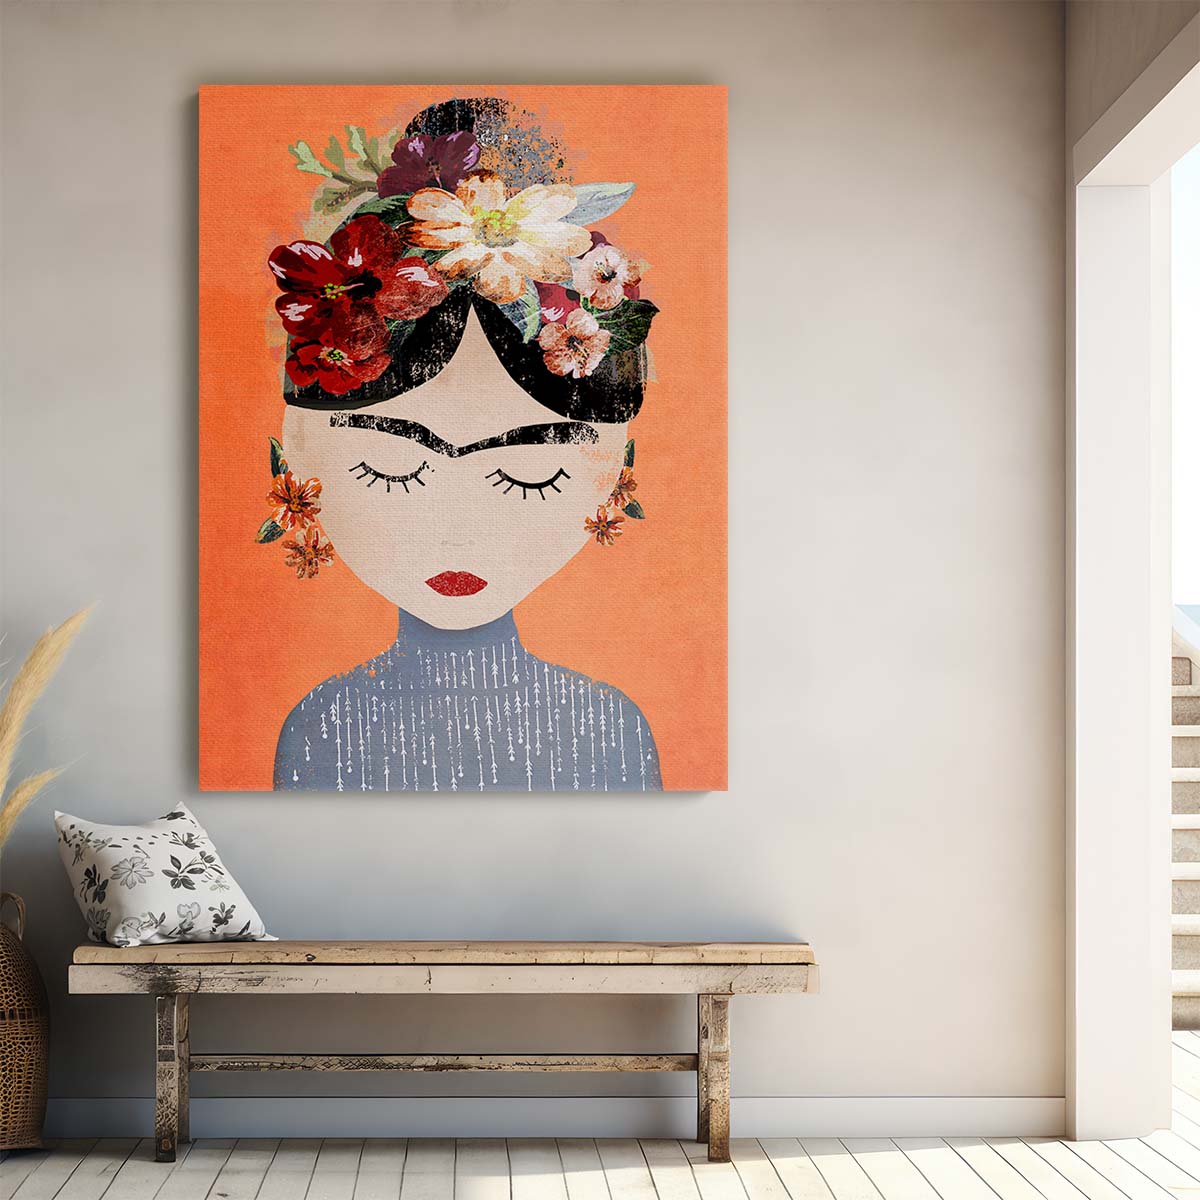 Frida Kahlo Colorful Portrait Illustration with Floral Wreath by Luxuriance Designs, made in USA